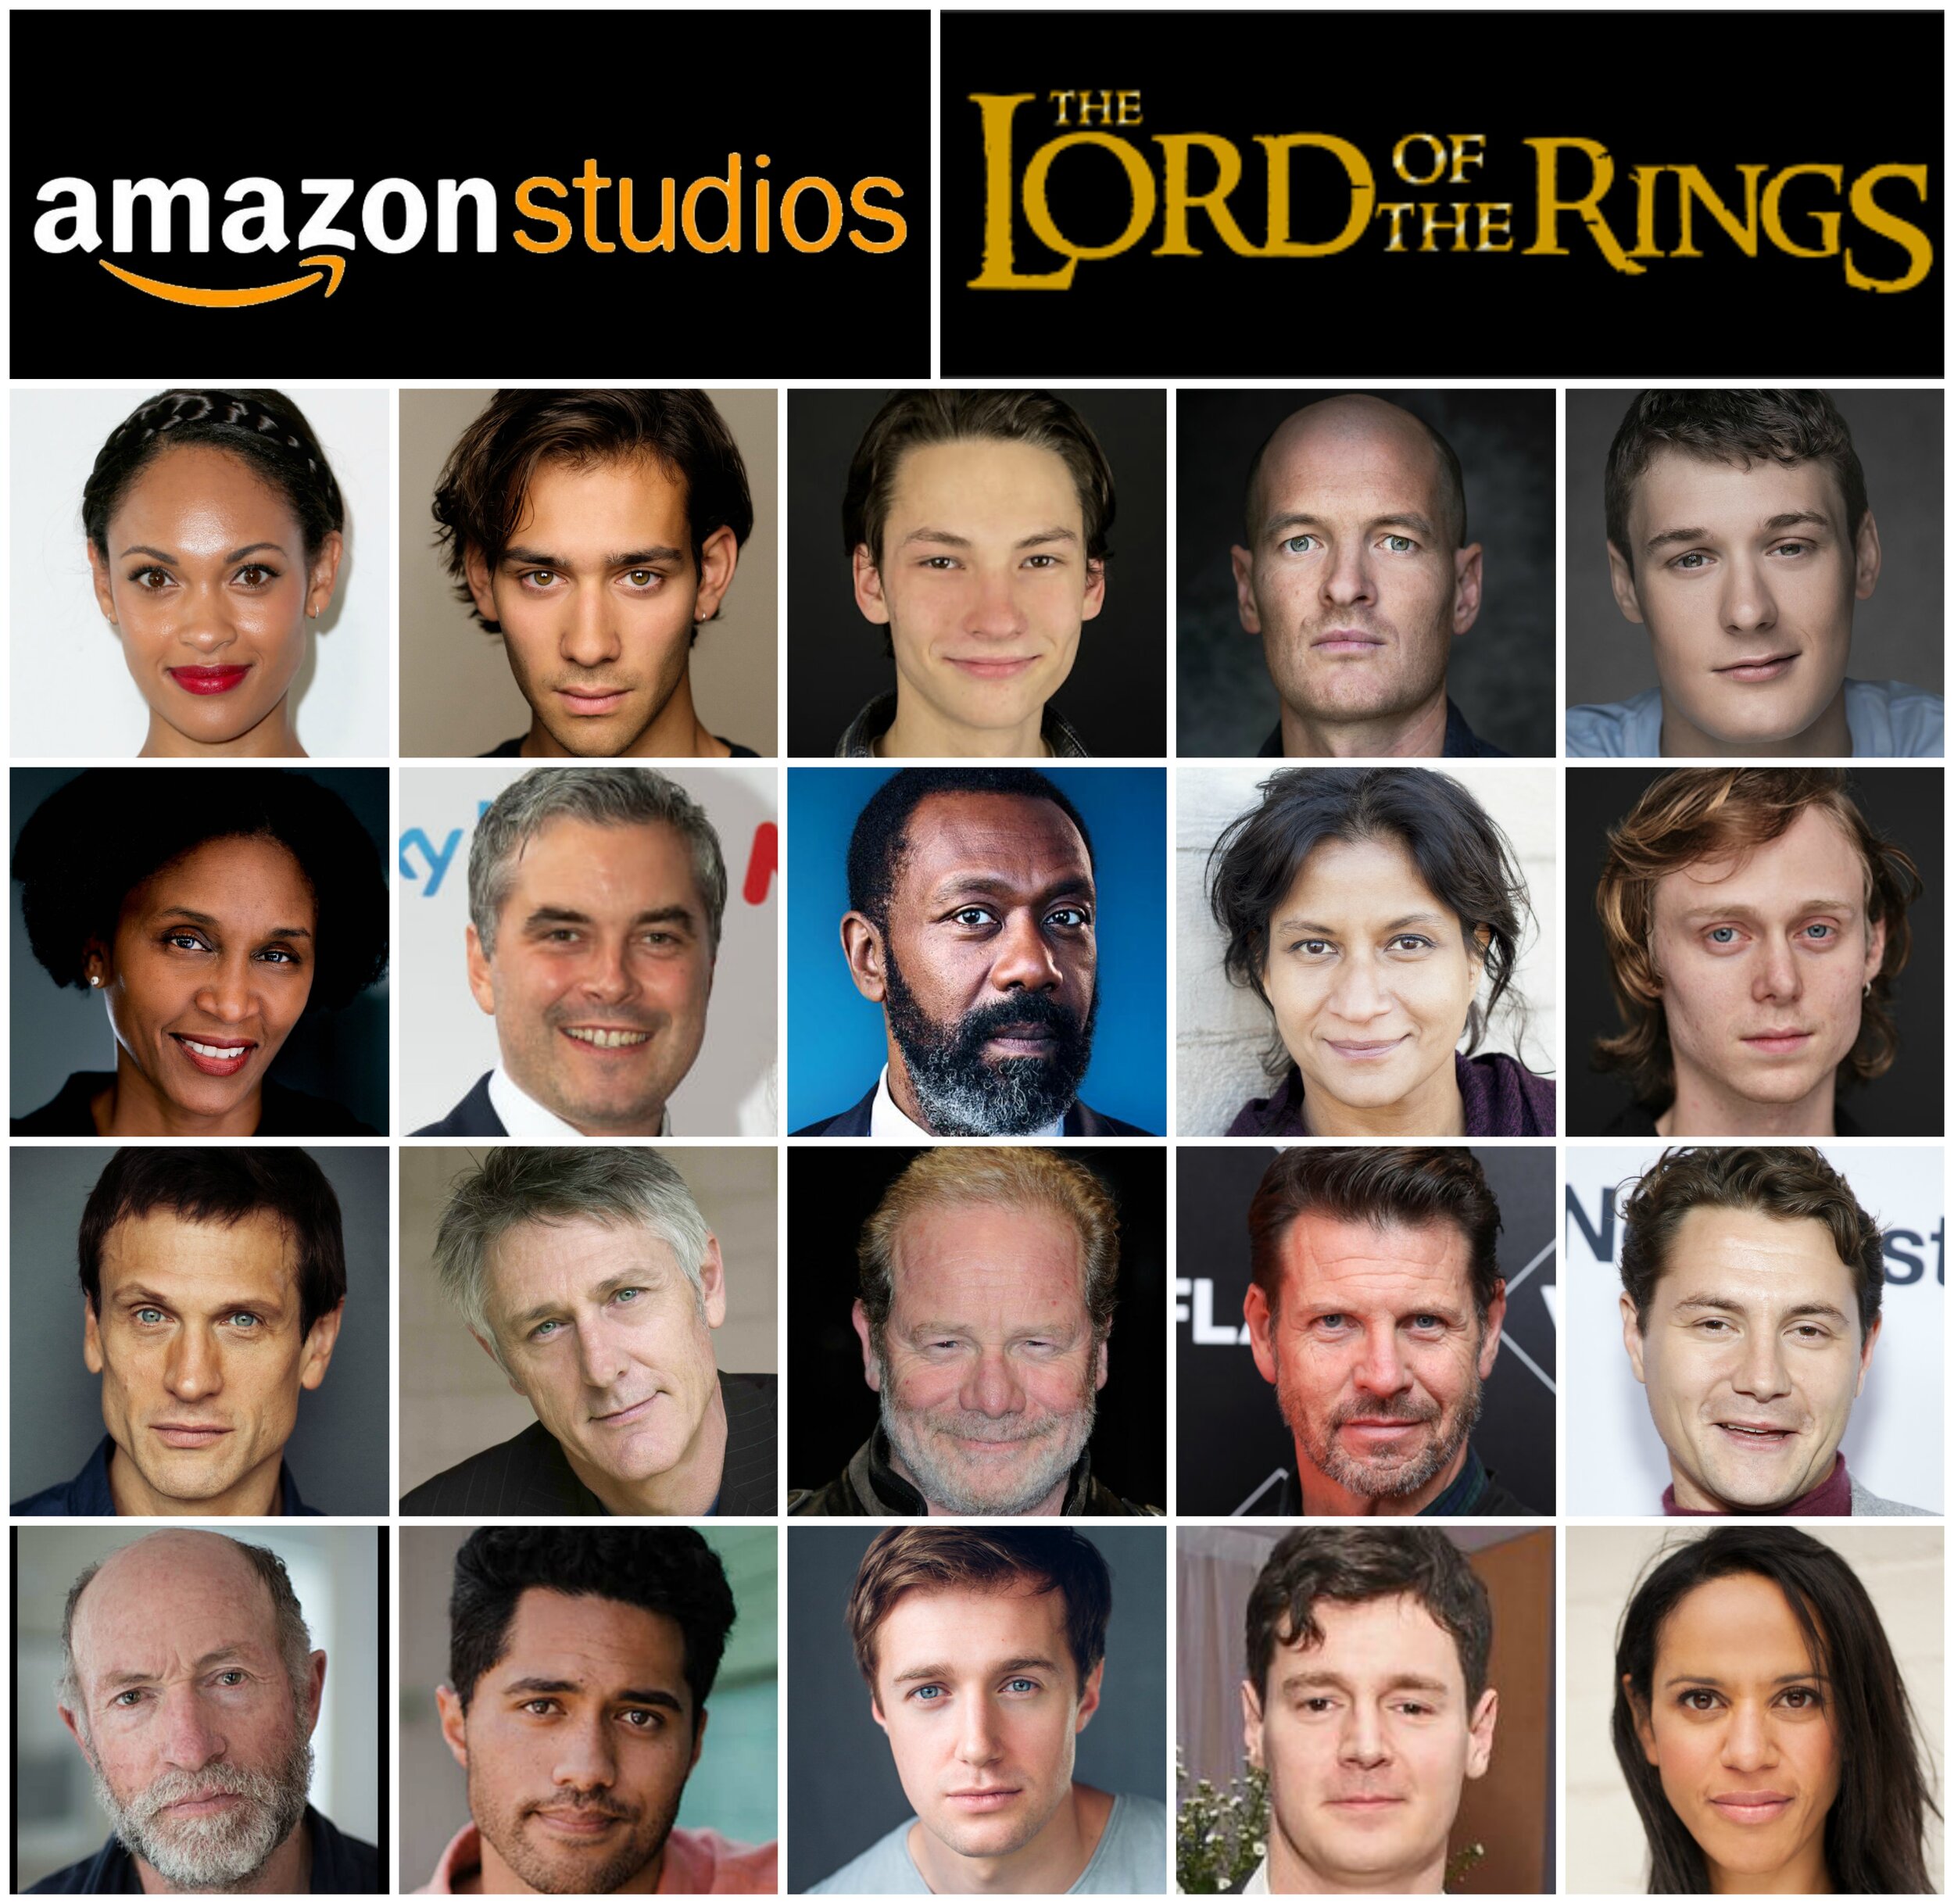 Original Lord Of The Rings Cast Member Returns In A Brand New LOTR Project